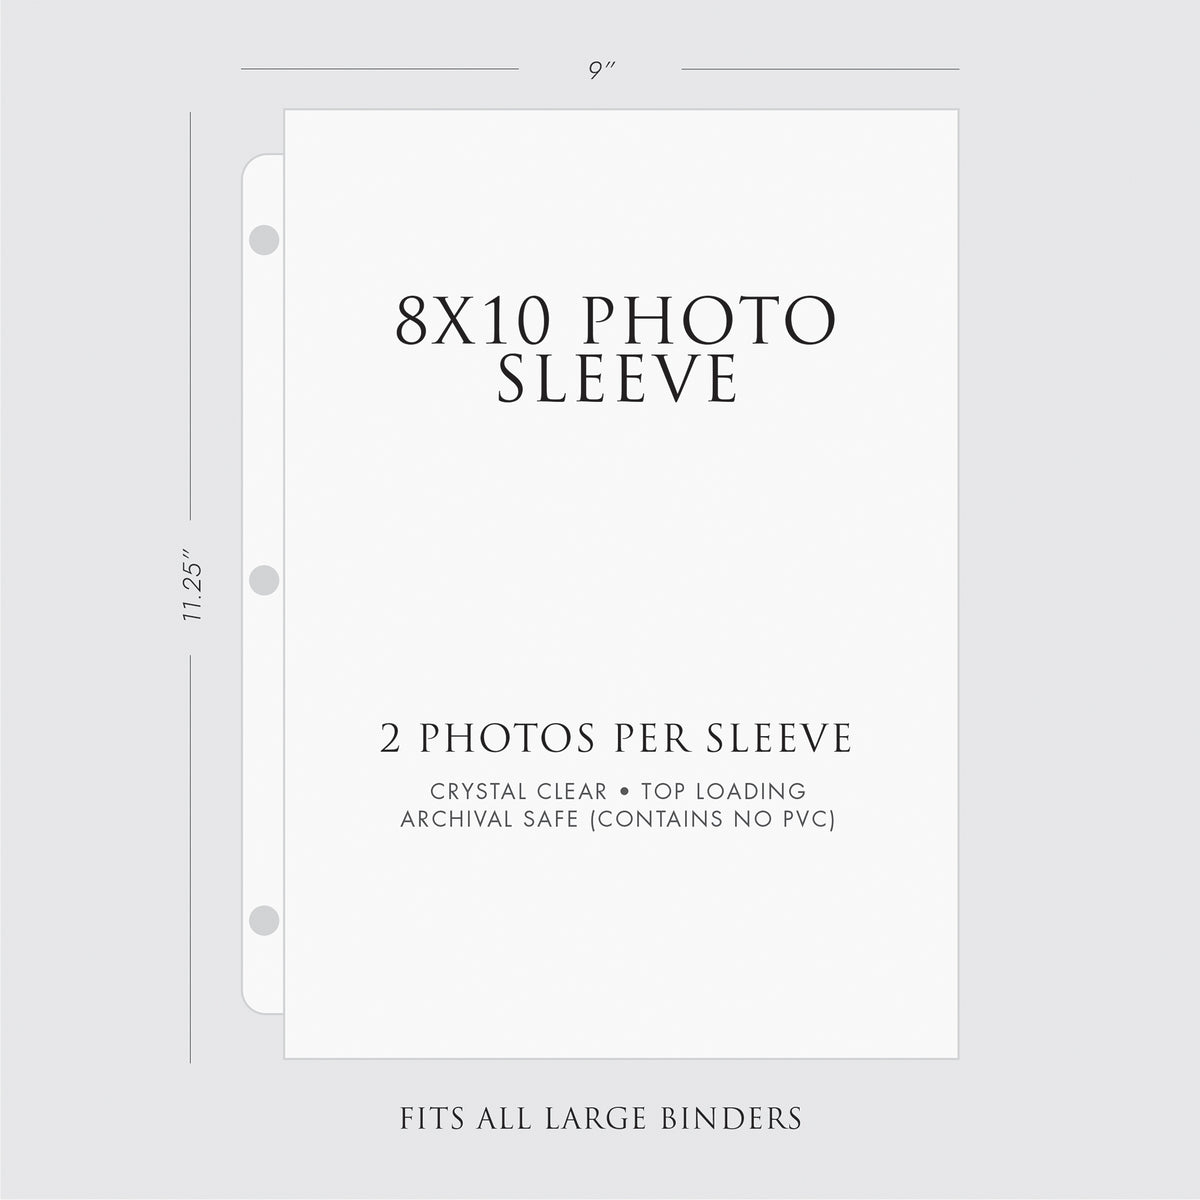 Large Photo Binder For 8x10 Photos | Cover: Jade Silk | Available Personalized